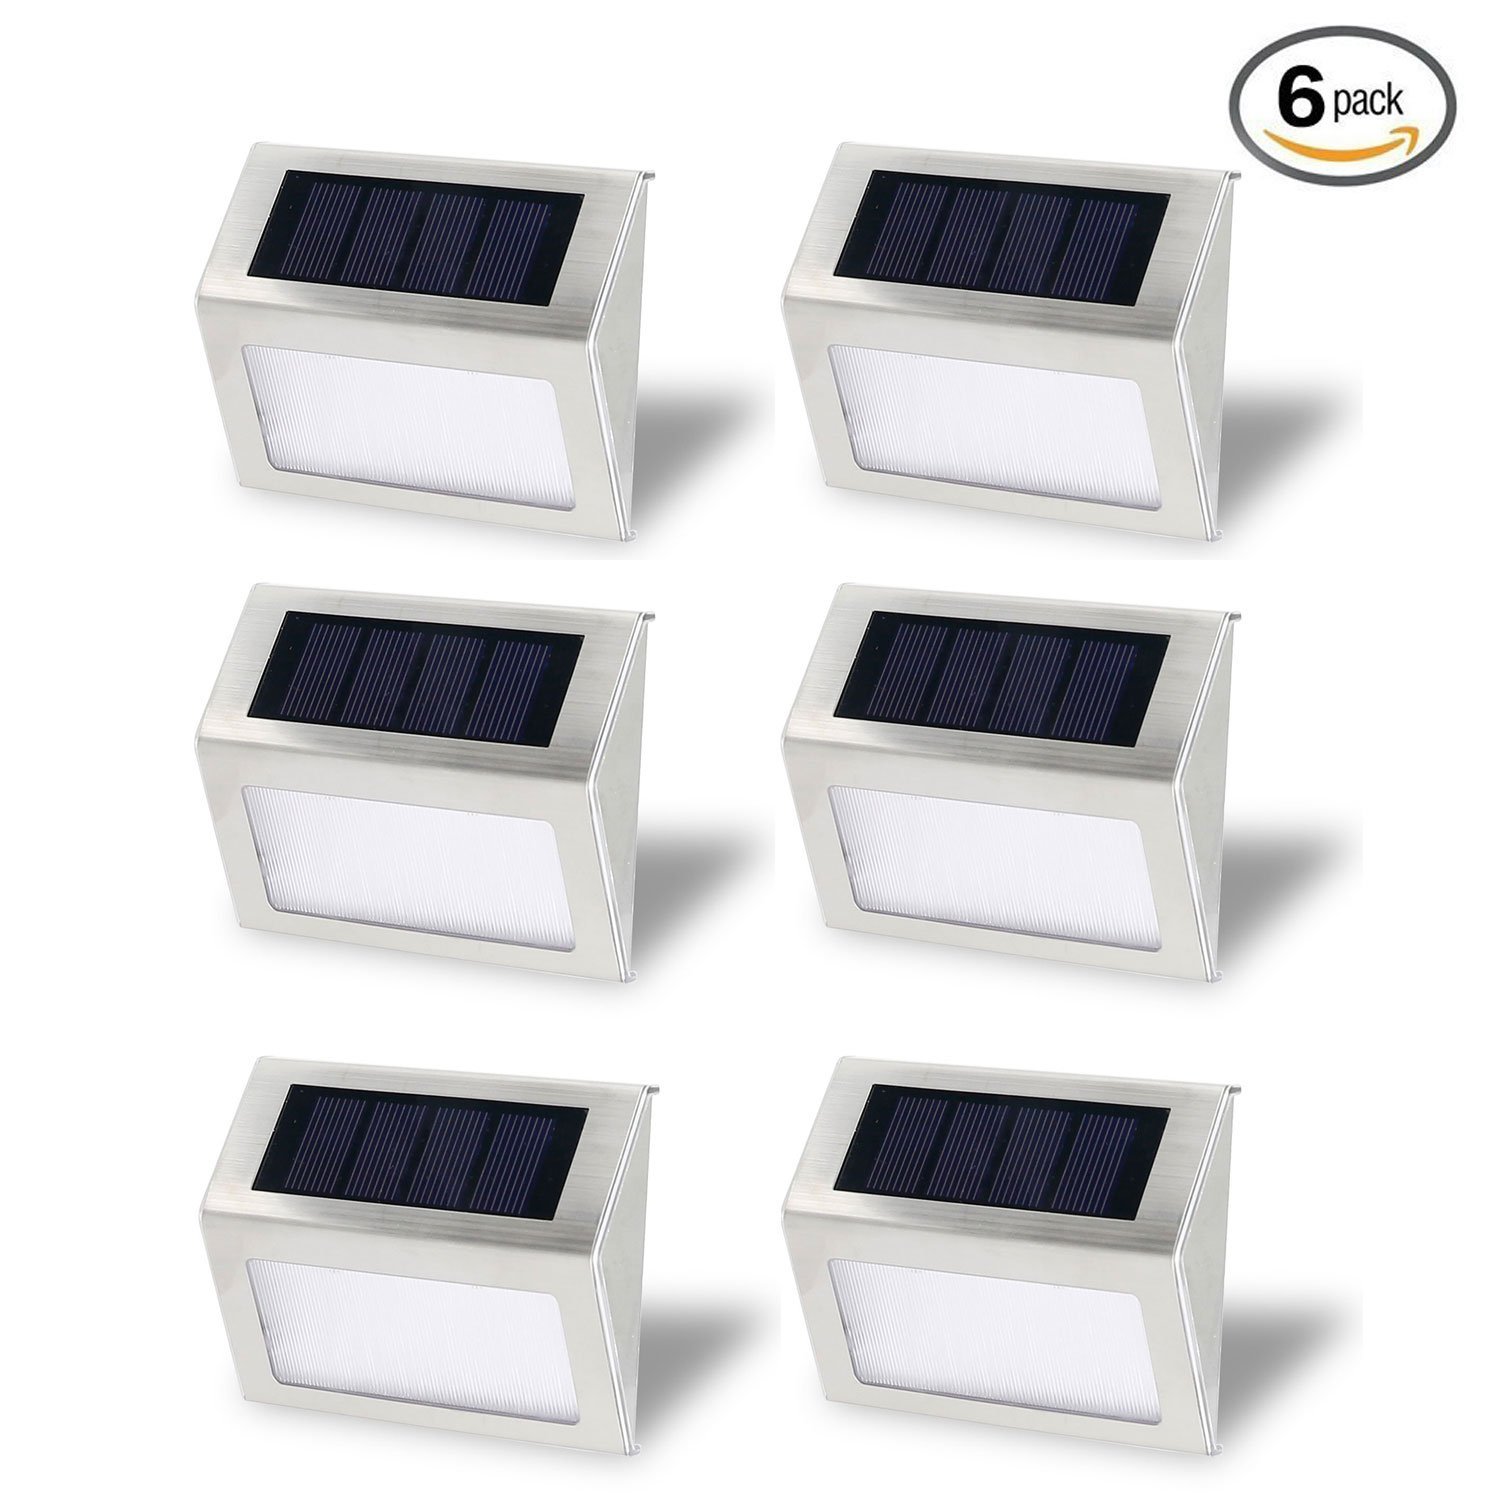 Solar Stair Light, EpicGadget Waterproof Outdoor LED Step Lighting 3 LED Solar Powered Step Lights Stainless Steel Outdoor Lighting for Steps Paths Patio Stairs (6 Pack) - image 1 of 5